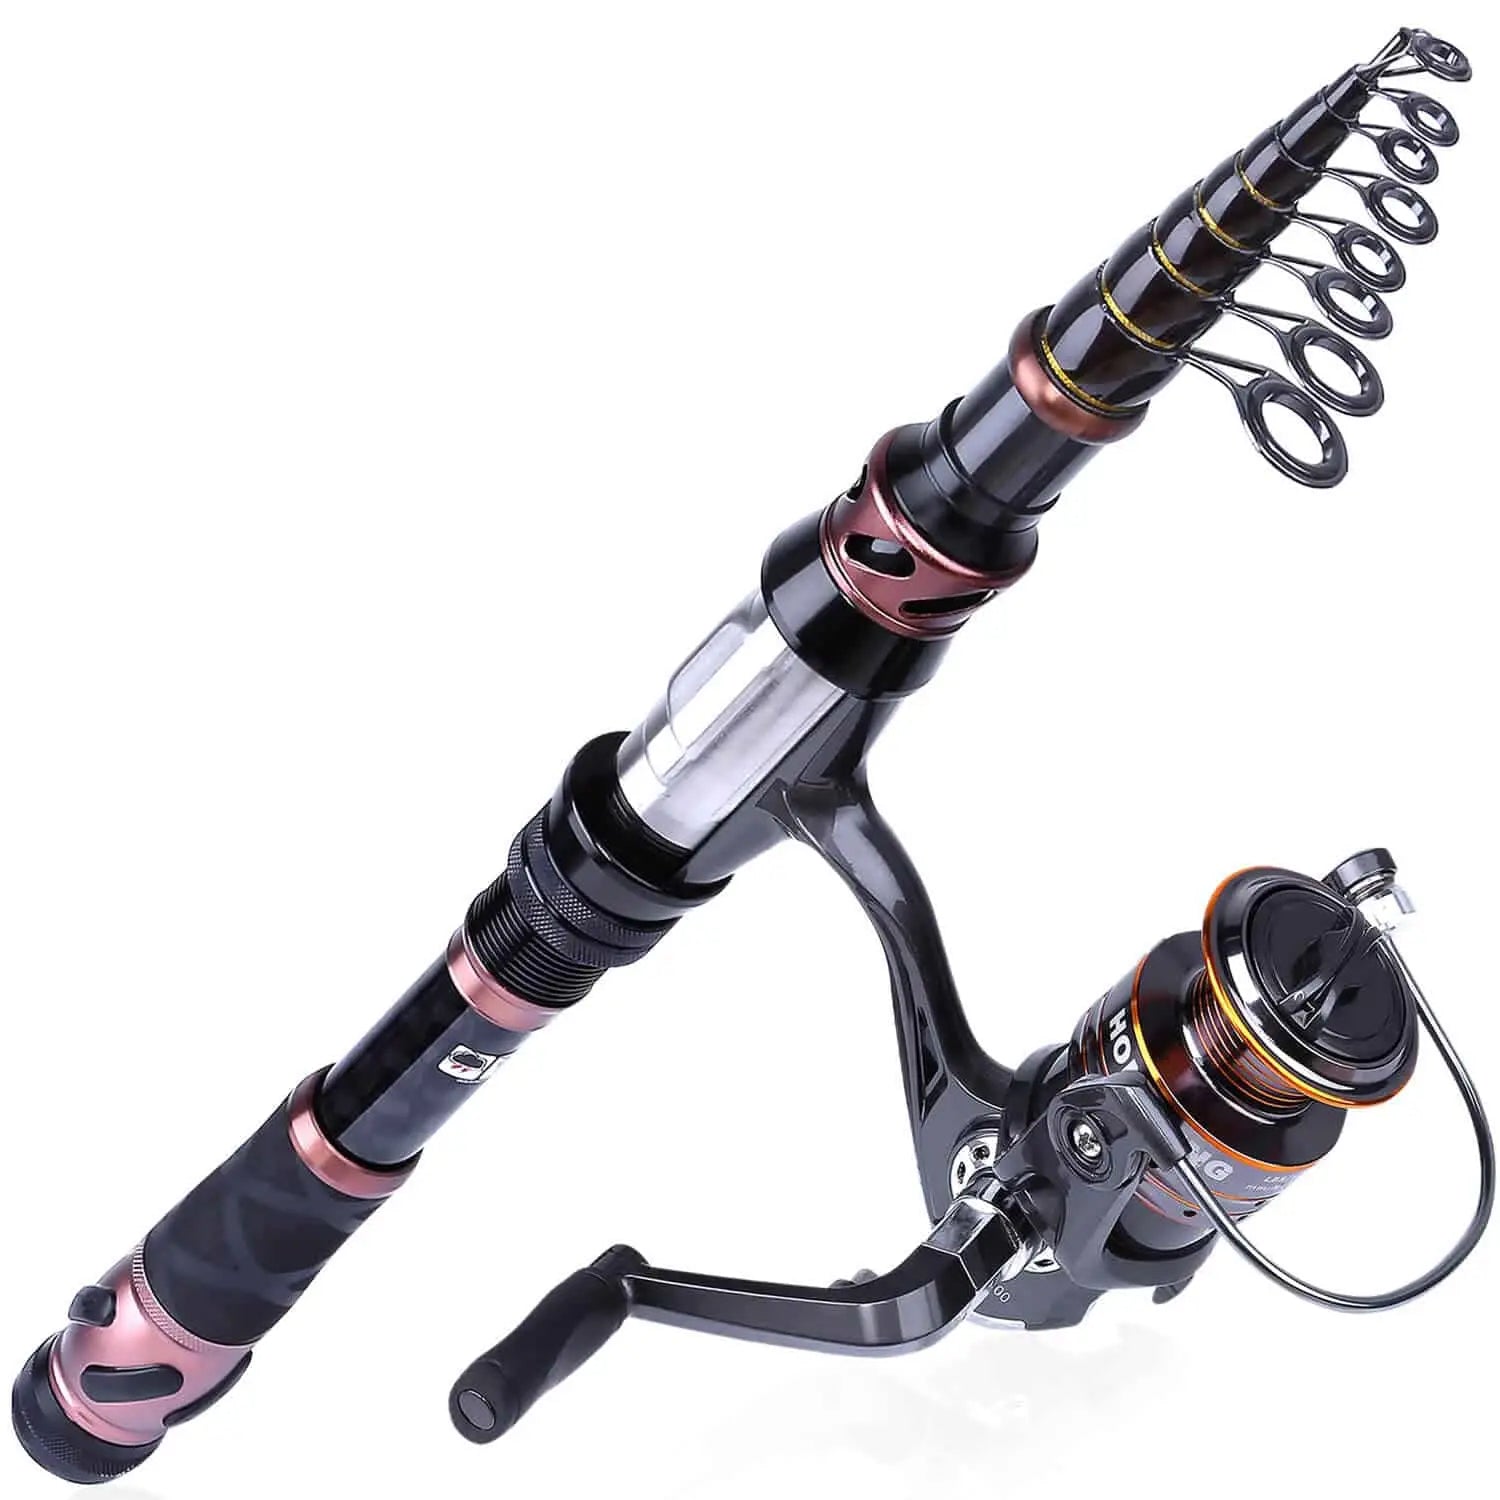 PLUSINNO Eagle Hunting V Spinning Telescopic Fishing Rods and Reel